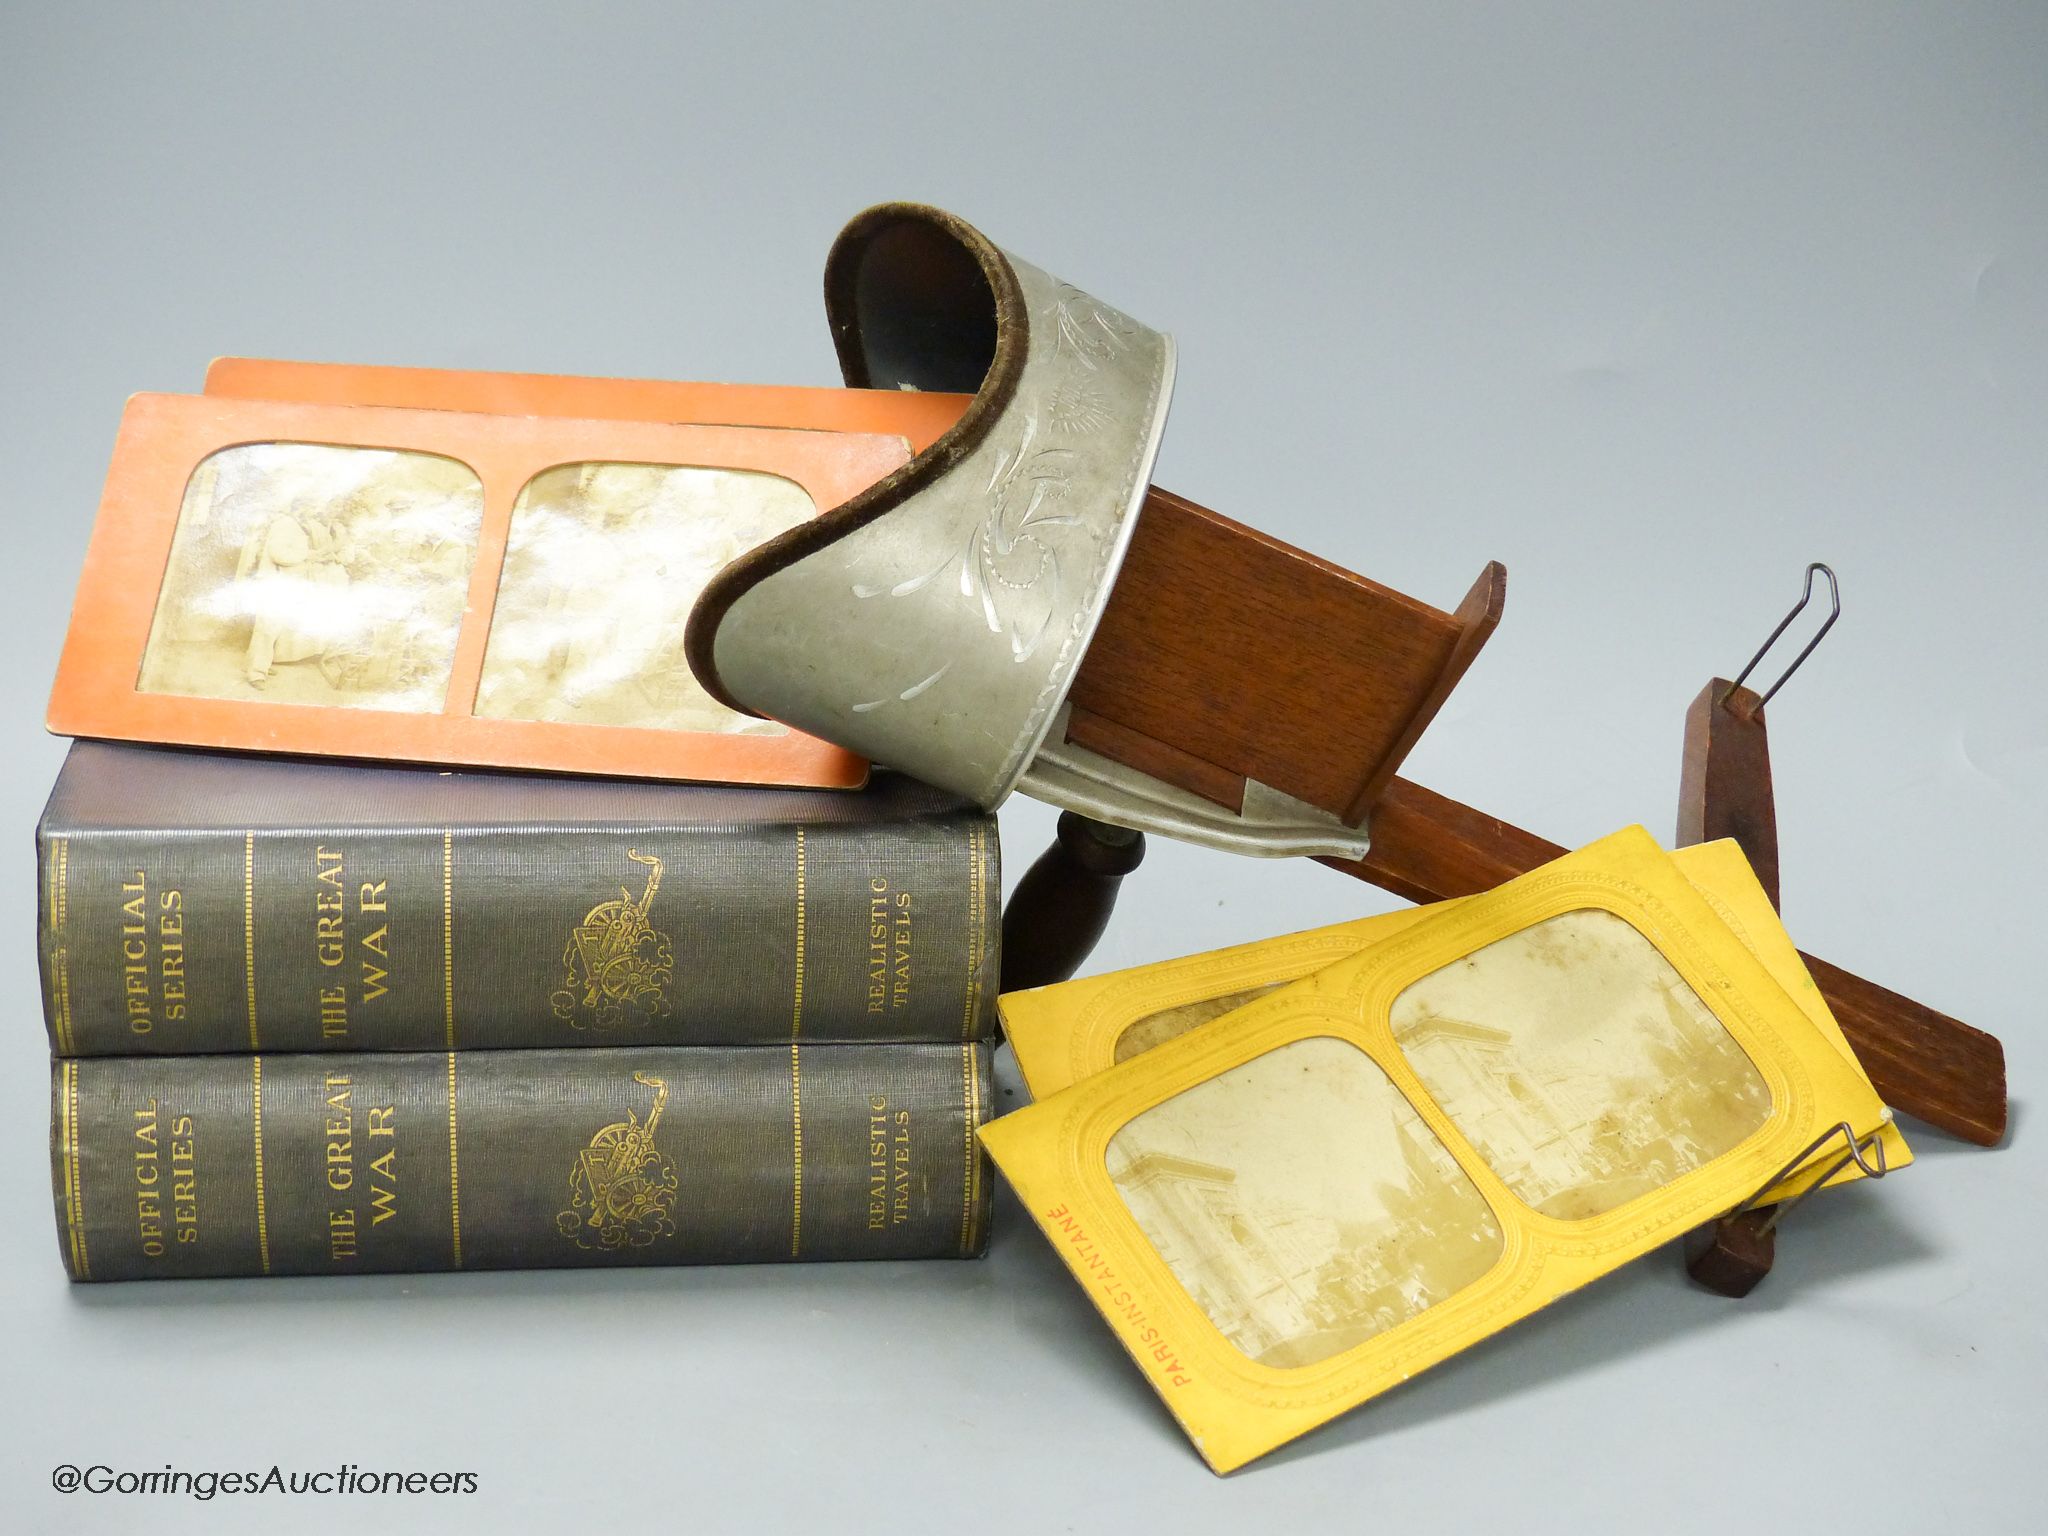 An Underwood & Underwood stereoscopic viewer, a collection of Realistic Travels 'The Great War'